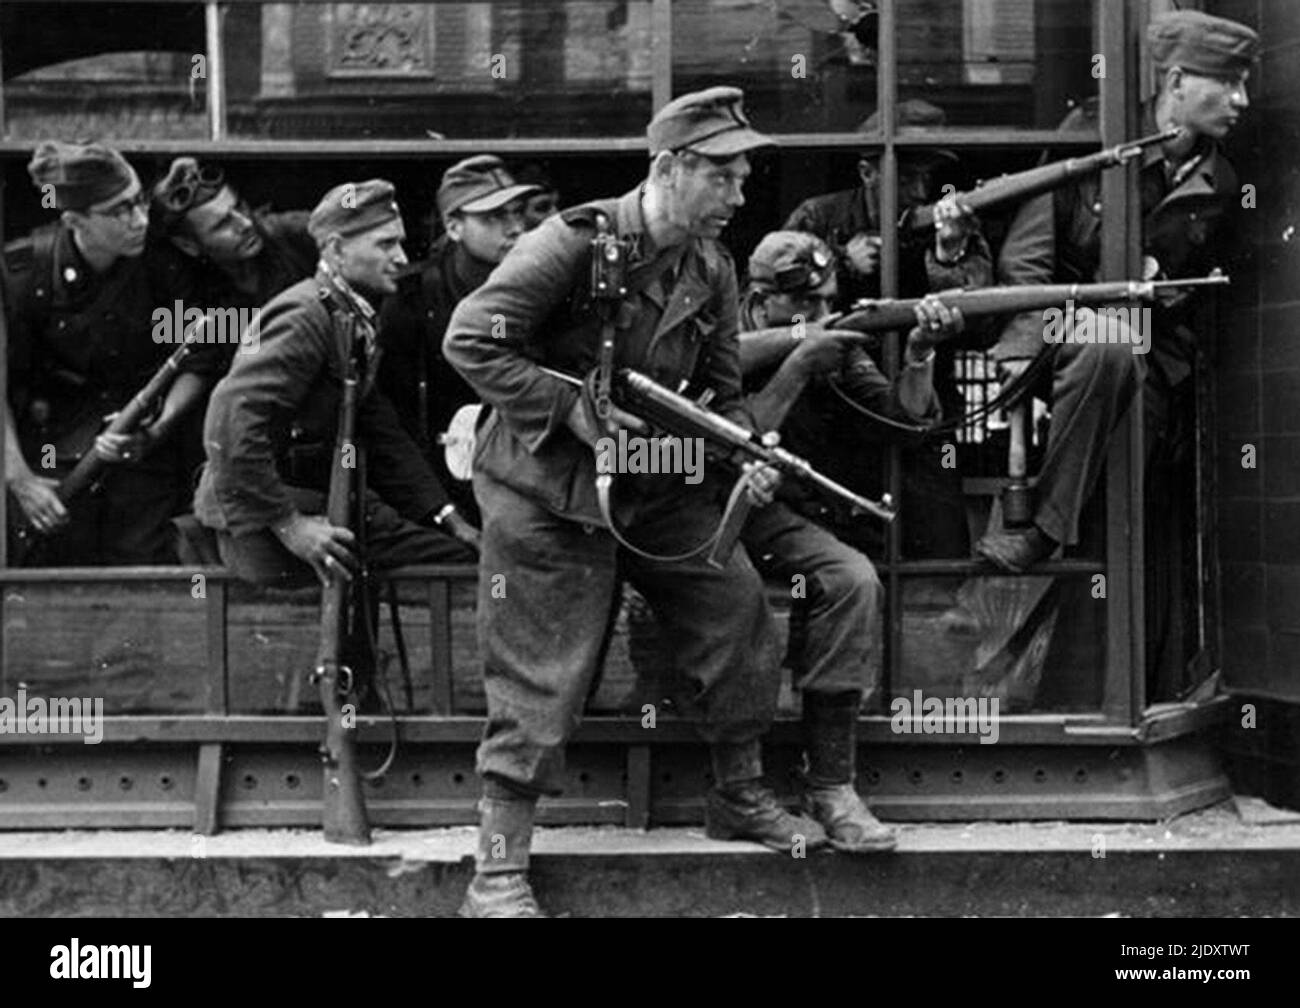 Members of the especially violent Dirlewanger Brigade in action in Warsaw during the 1944 Warsaw Uprising. This unit of the SS was led by Oskar Dirlewanger and was composed of convicted criminals. Even among the SS he was considered as particularly barbaric. The brigade assisted in the execuion of around 100,000 Polish residents of Warsaw, most notably in the appalling violence inflicted in the Wola Massacre. Stock Photo